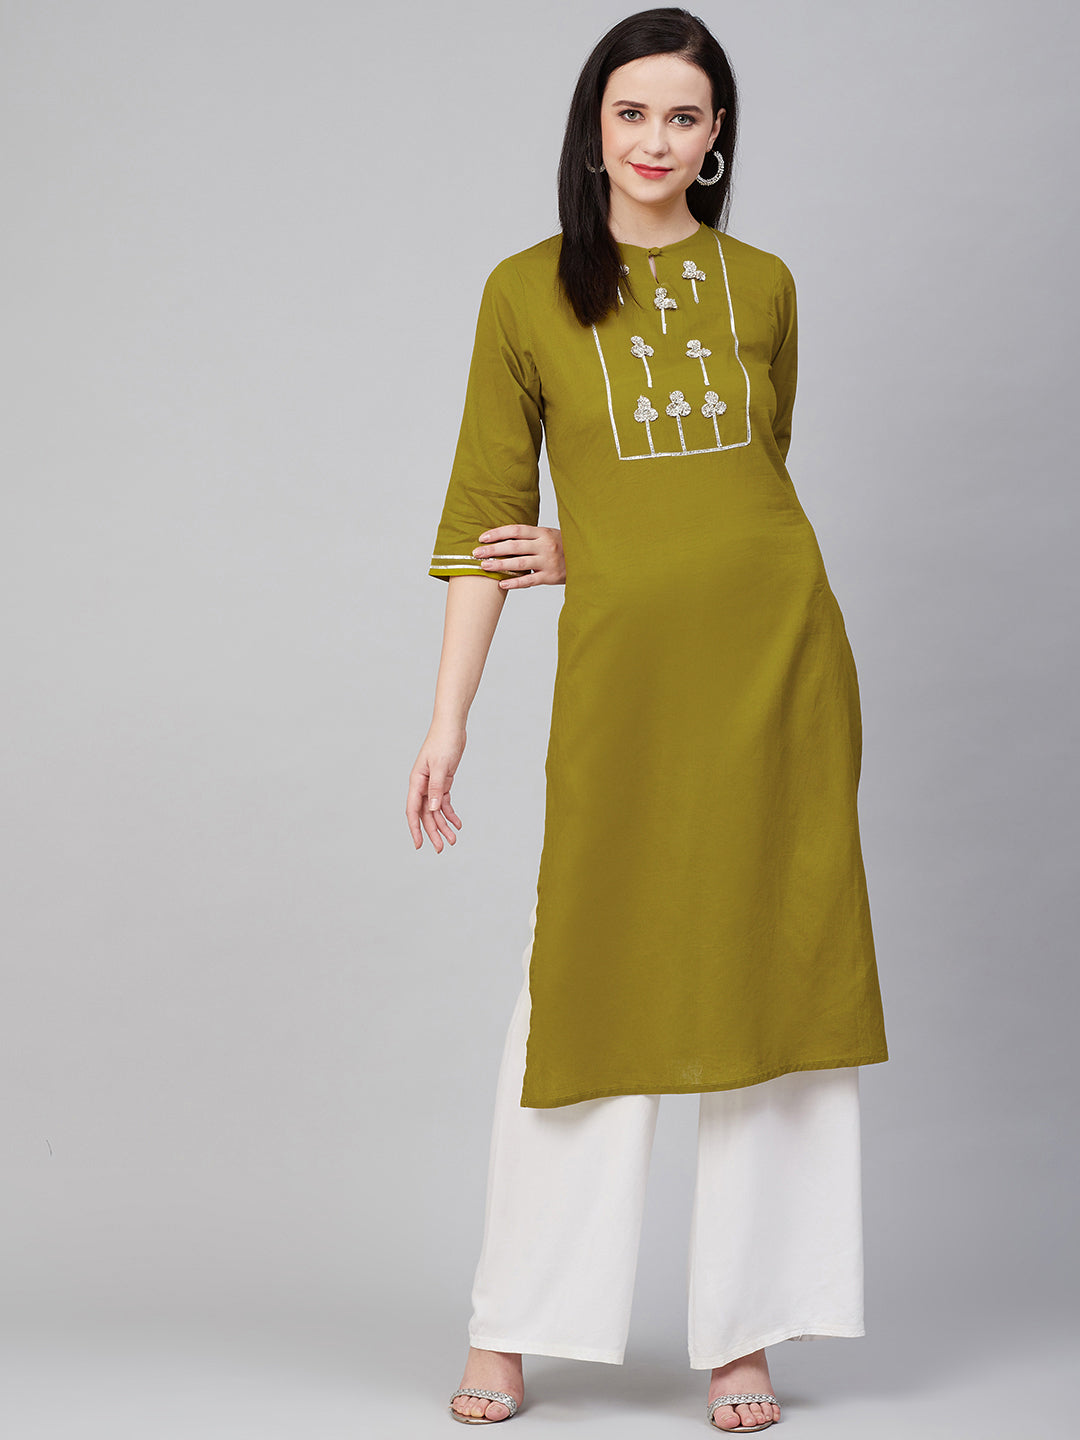 Women's Olive Green And Silver-Toned Embellished Kurta - Bhama Couture